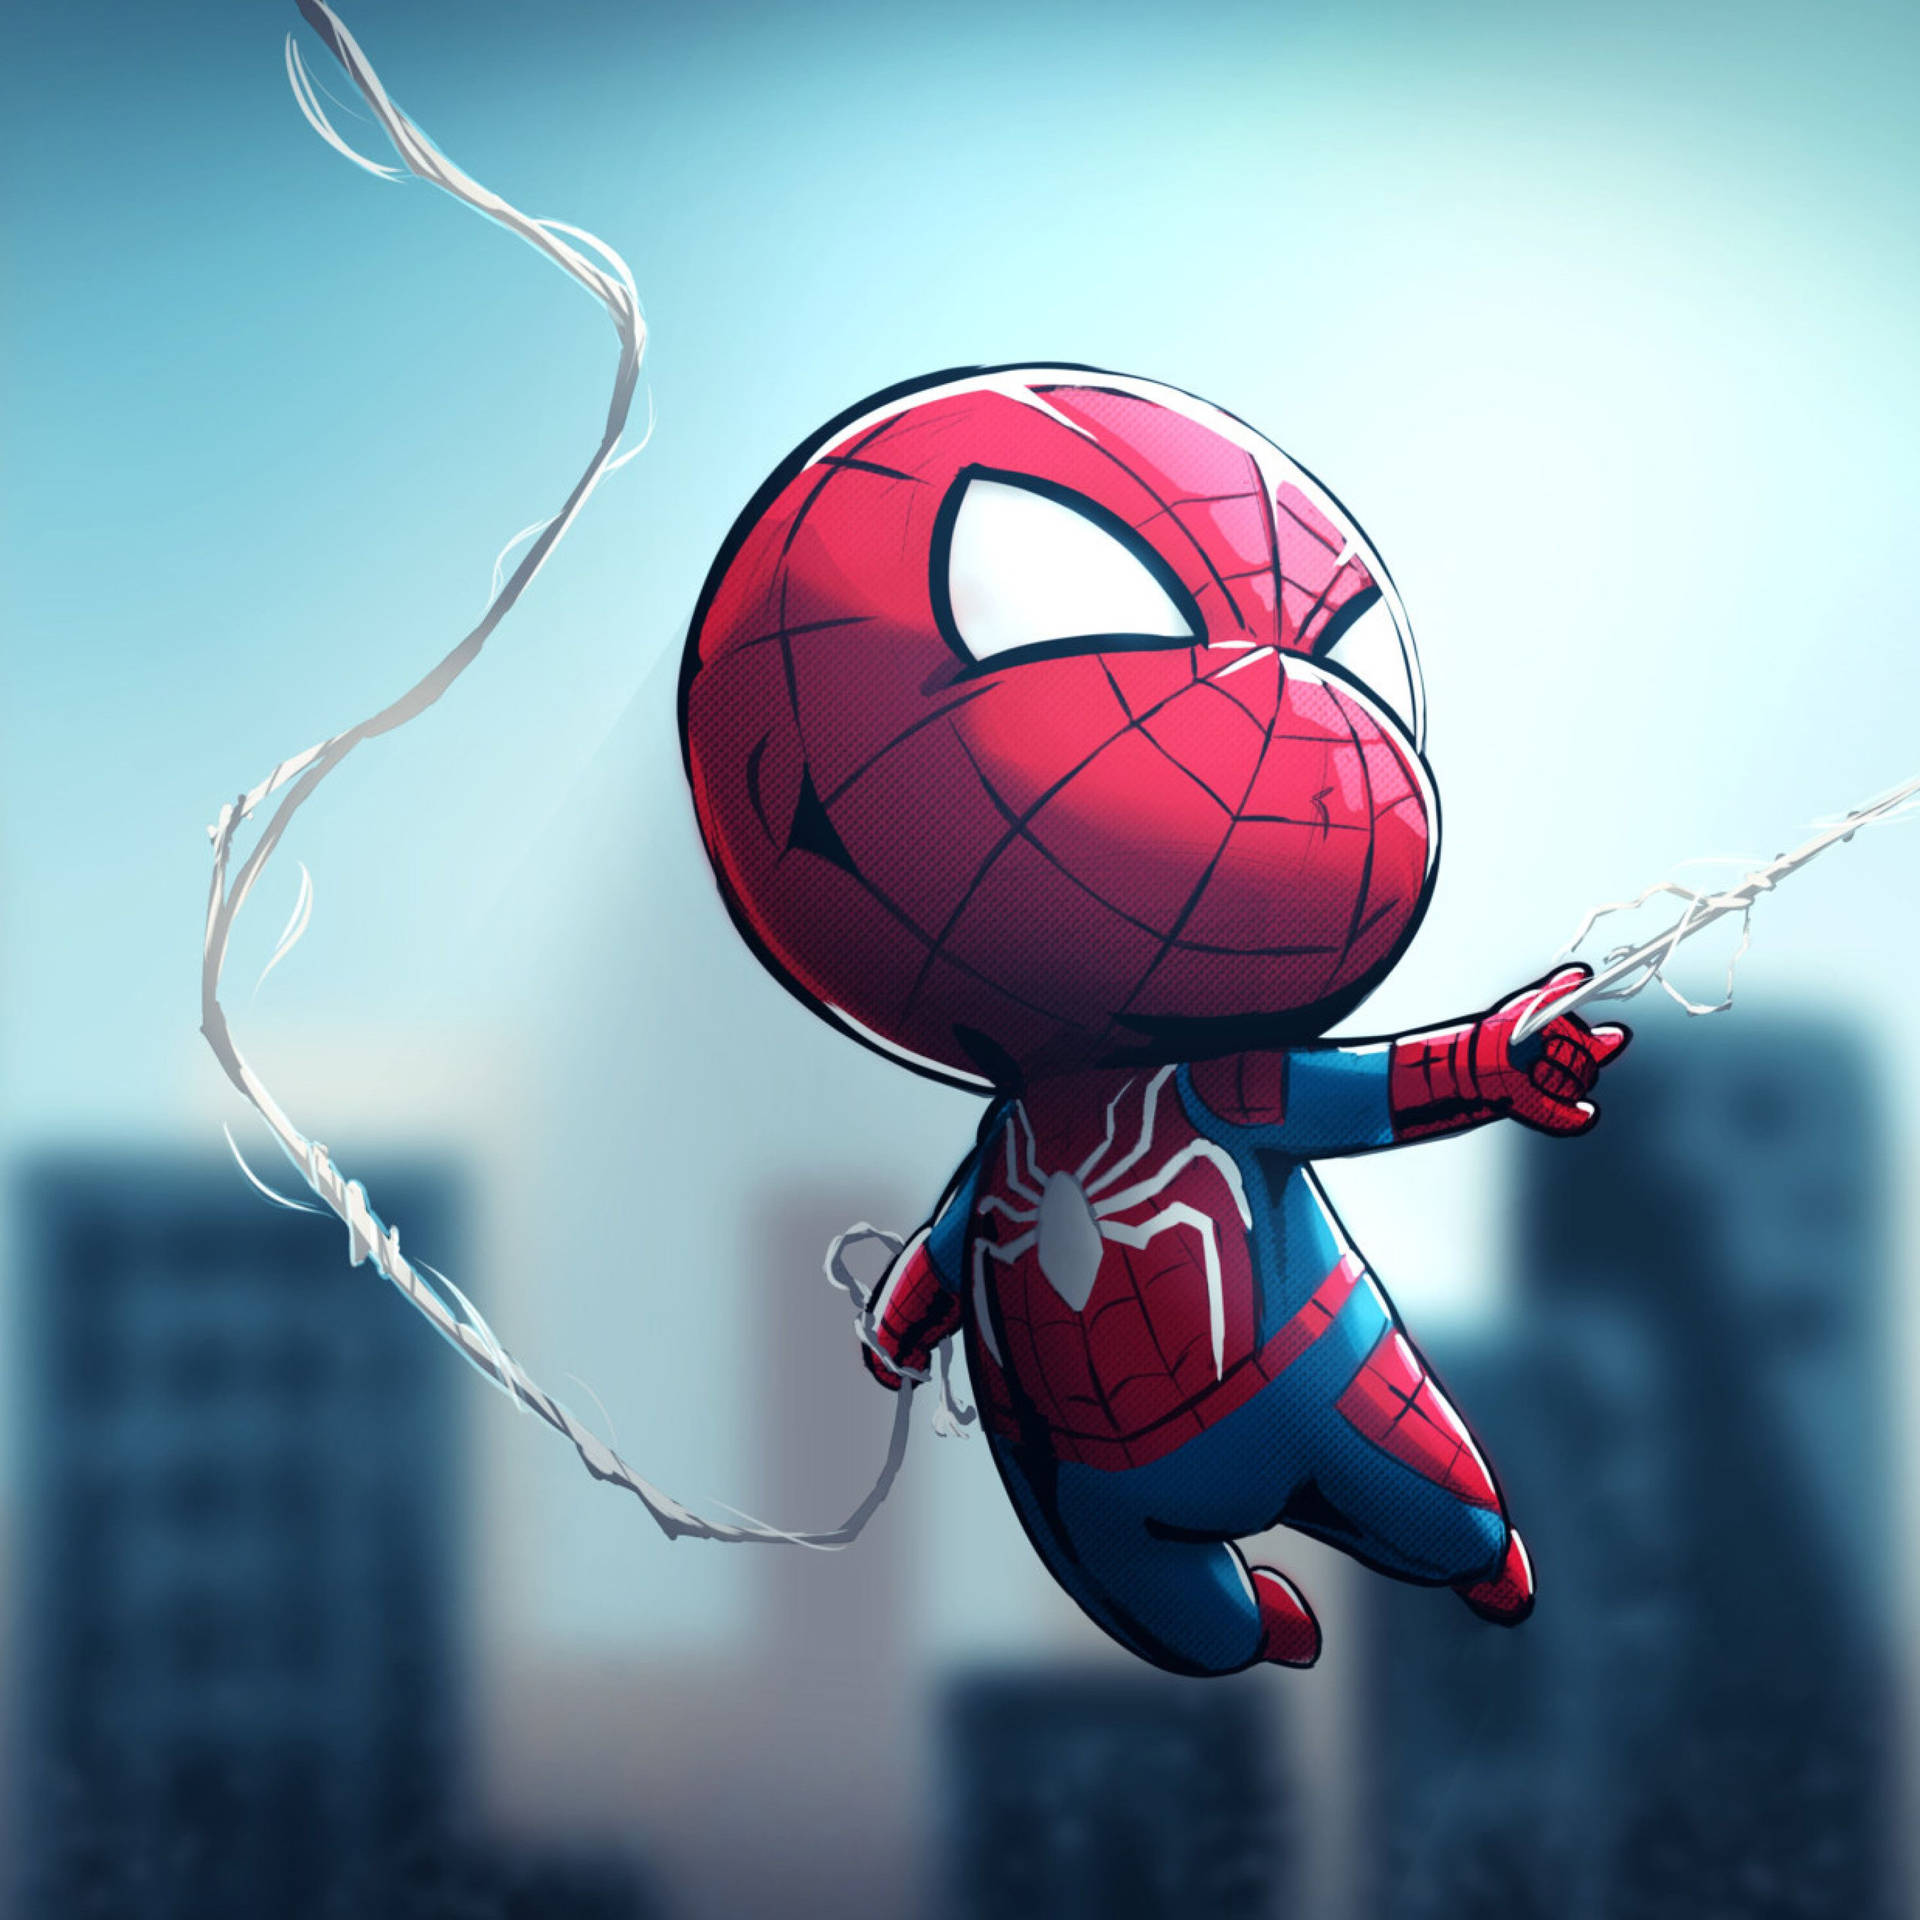 Chibi Spiderman balloon with big head and chubby tummy holding on his spider web super powers while hanging on it.